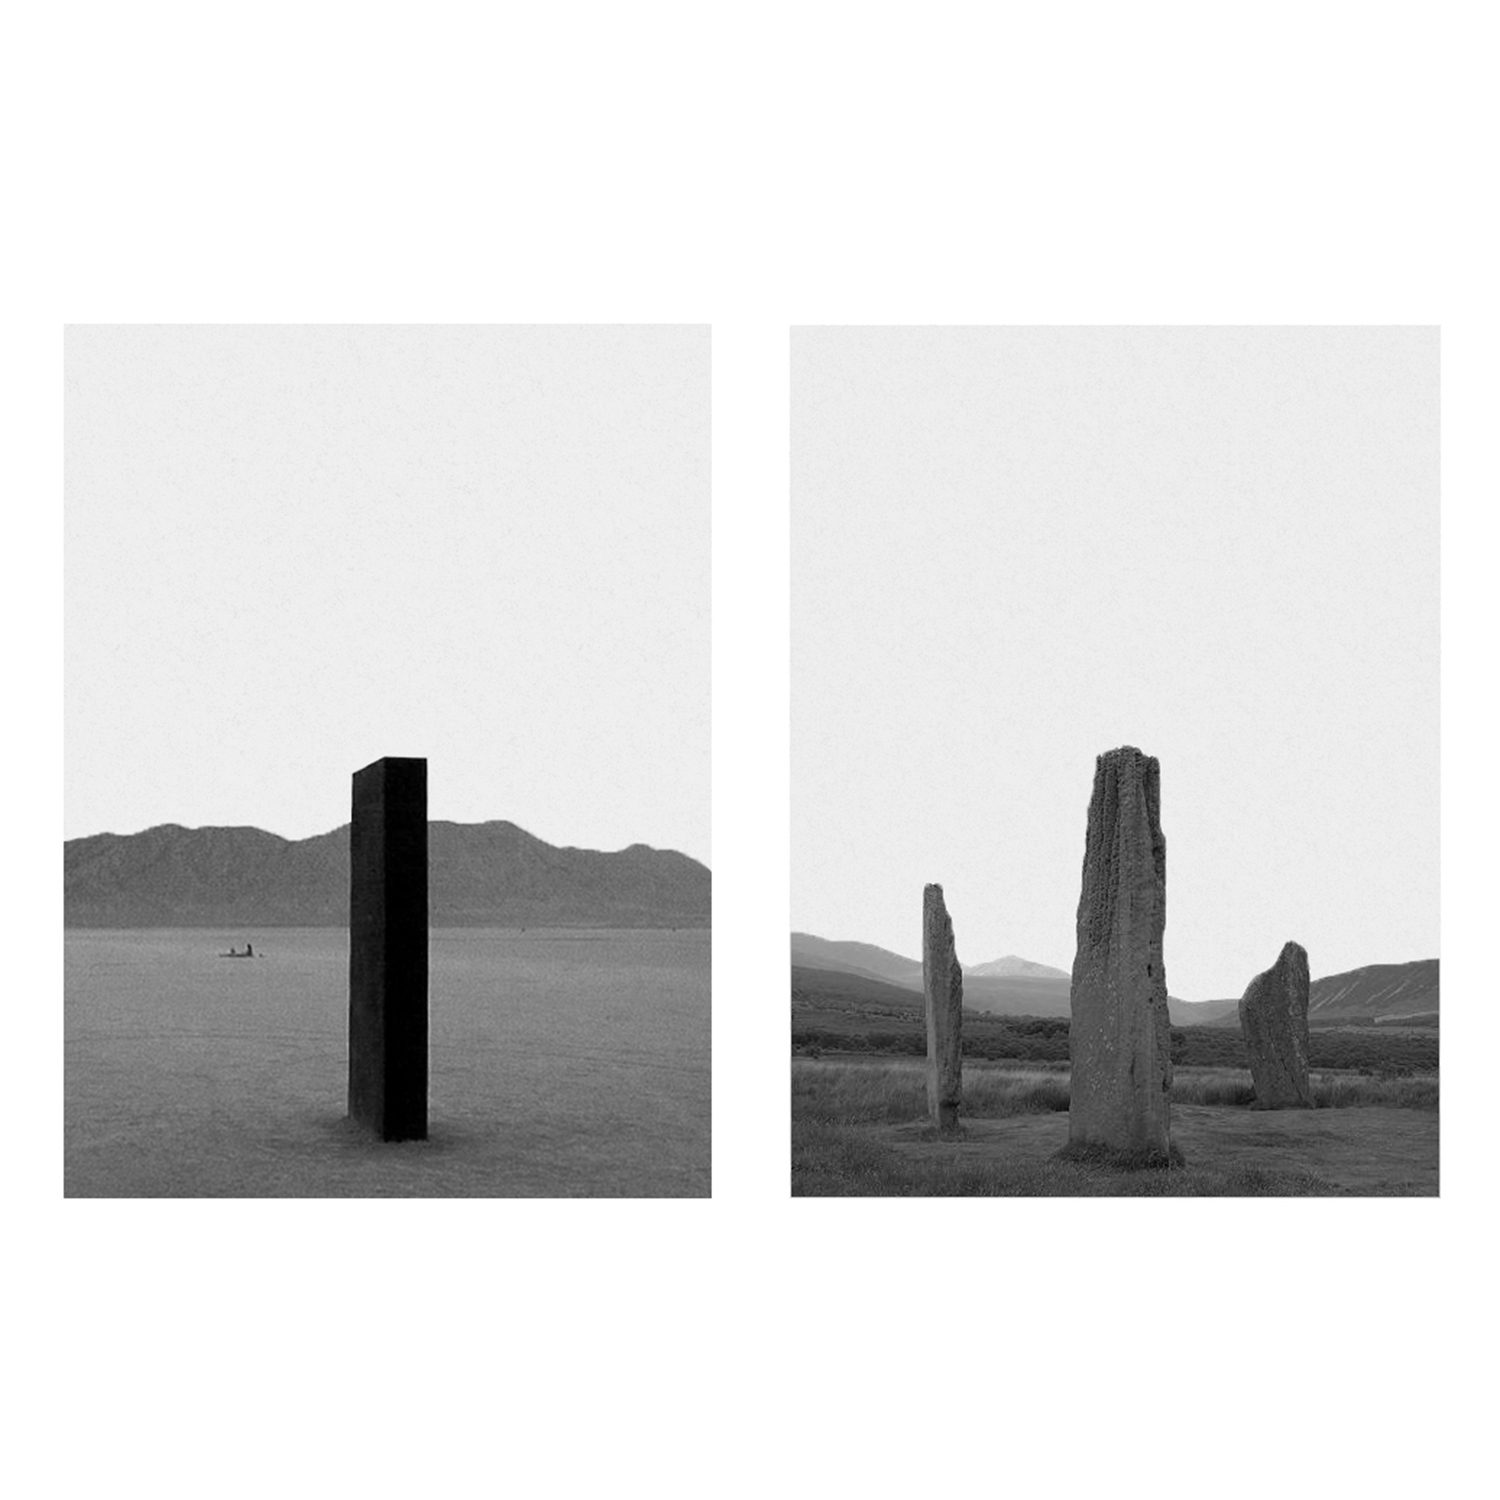 Monolith, YAC observatory houses concept